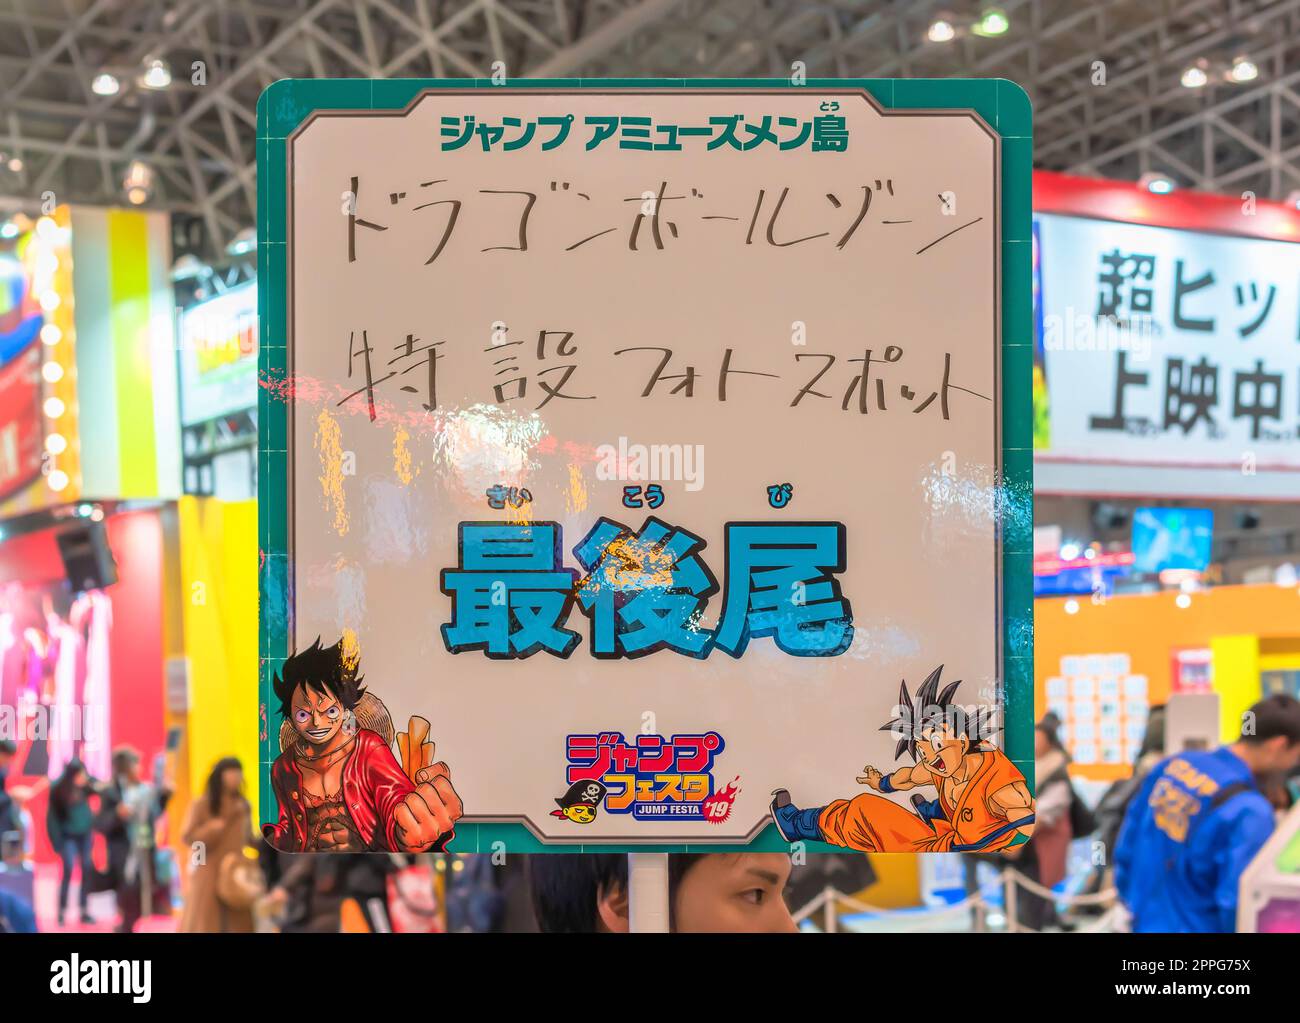 chiba, japan - december 22 2018: Sign indicating the end of the queue for the photo spot of the Japanese anime and manga series of Dragon Ball during the annual convention Jump Festa 19. Stock Photo